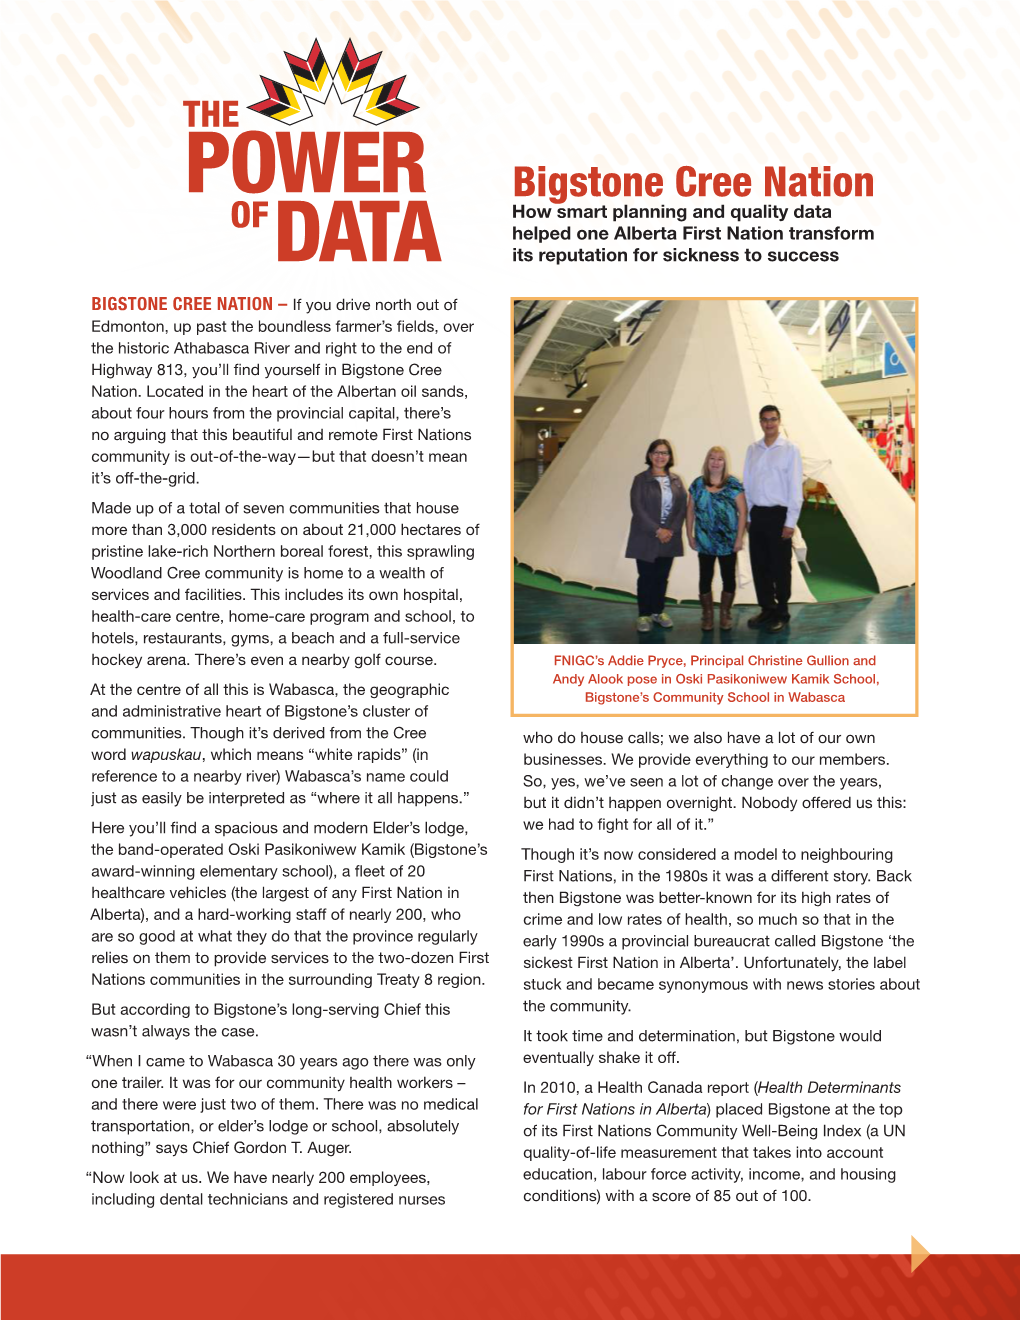 Bigstone Cree Nation How Smart Planning and Quality Data of Helped One Alberta First Nation Transform DATA Its Reputation for Sickness to Success